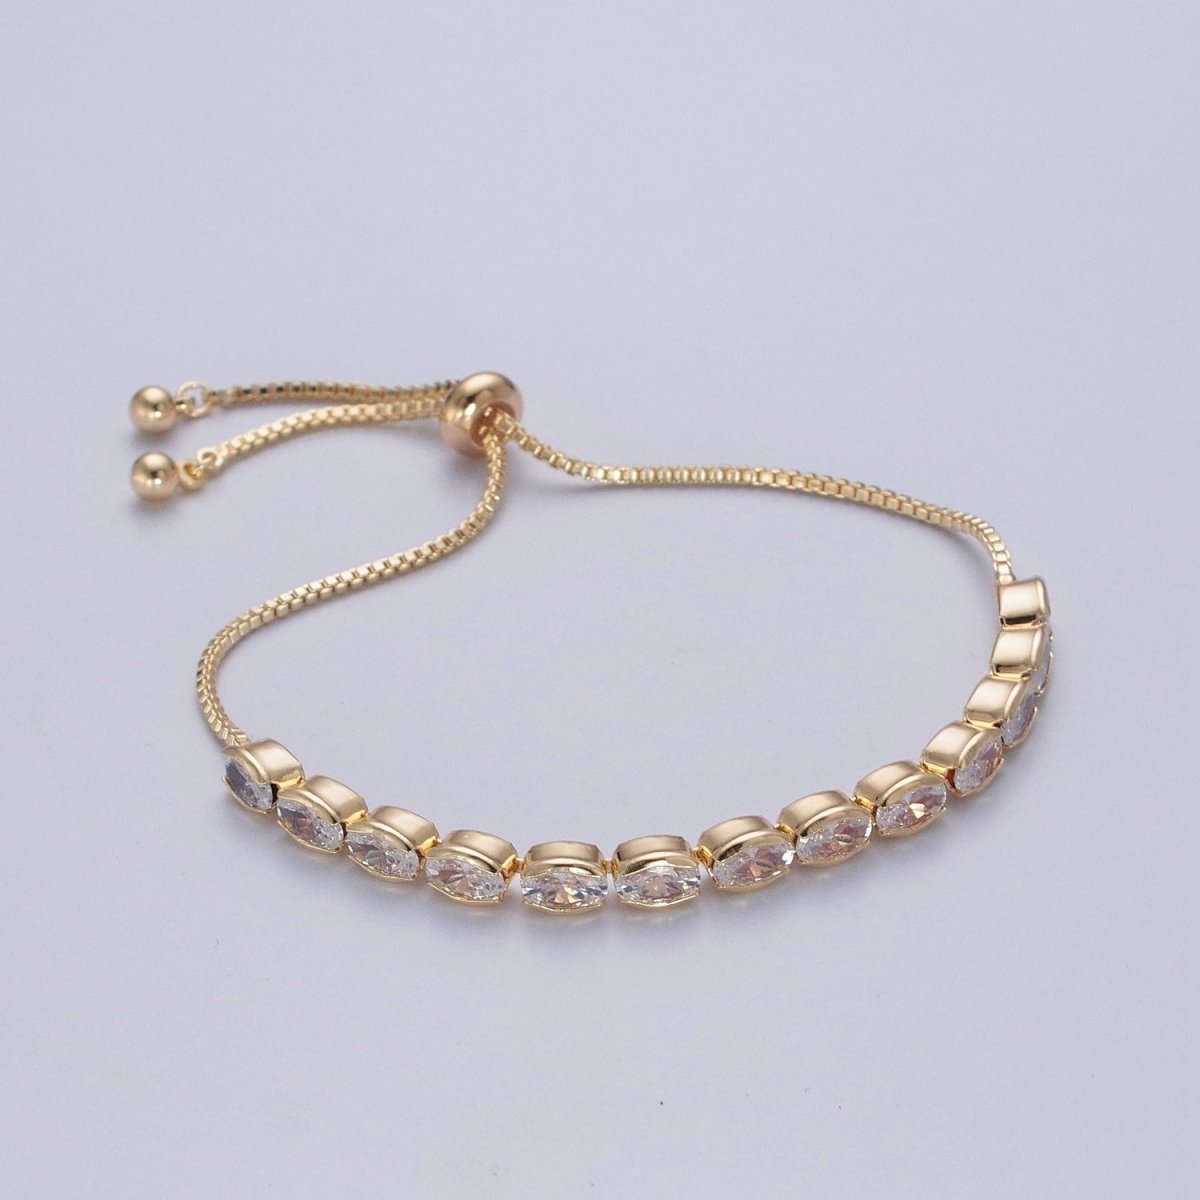 24K Gold Filled Clear Oval Cubic Zirconia Adjustable Bracelet Chain | WA-1003 Clearance Pricing - DLUXCA